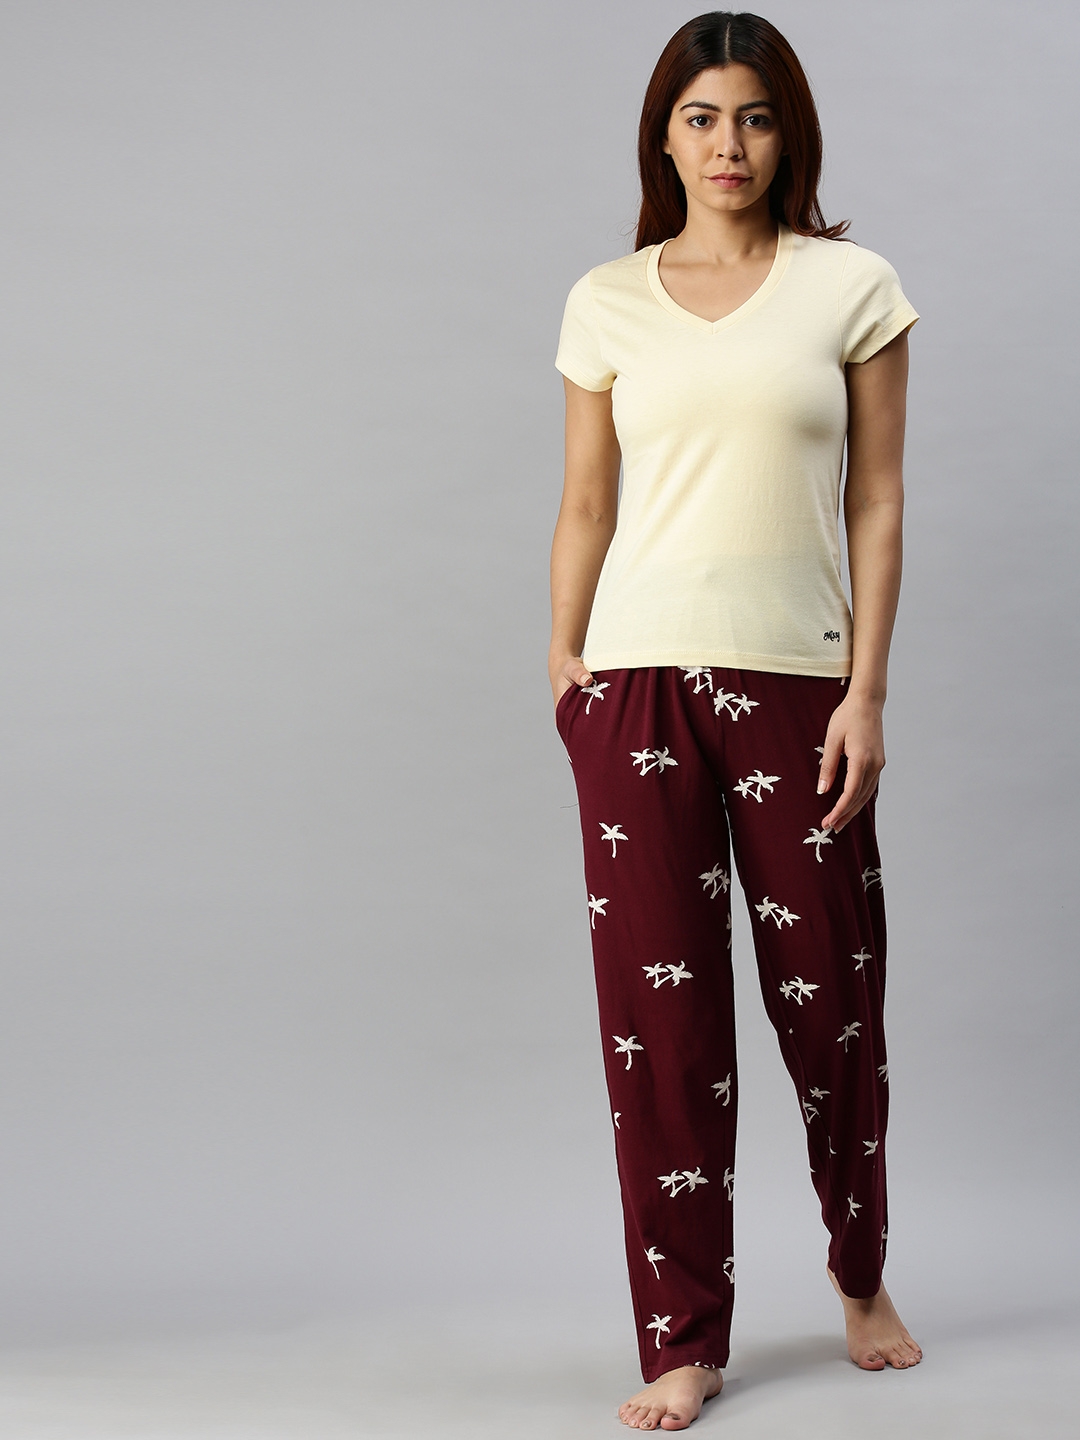 Kryptic | Kryptic Womens 100% Cotton Full Length Lounge Pants - Pack of 2 6